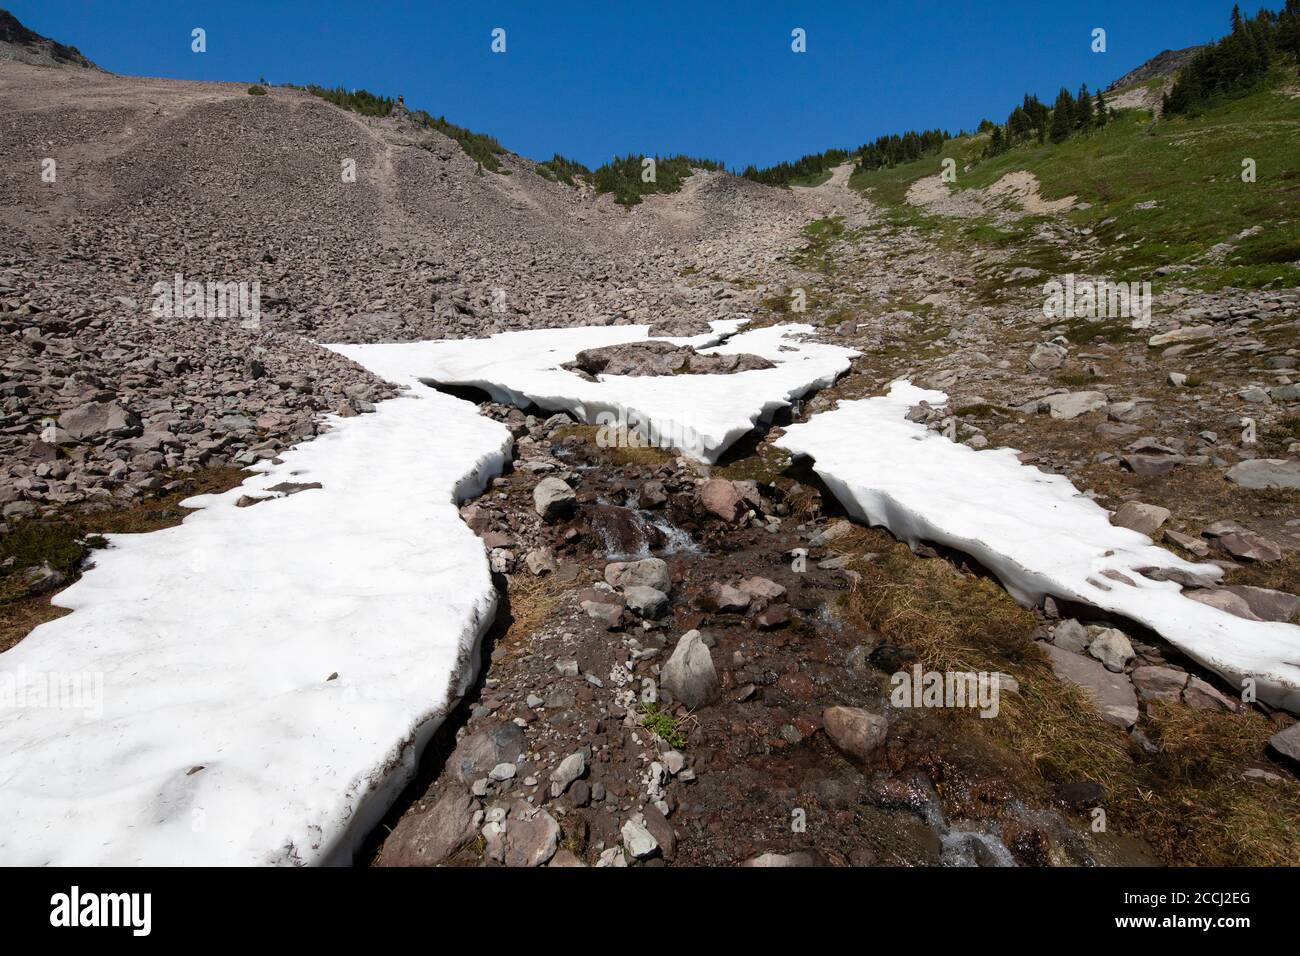 Channel through snow field formed by flowing Cispus River, Goat Rocks Wilderness, Gifford Pinchot National Forest, Washington State, USA Stock Photo